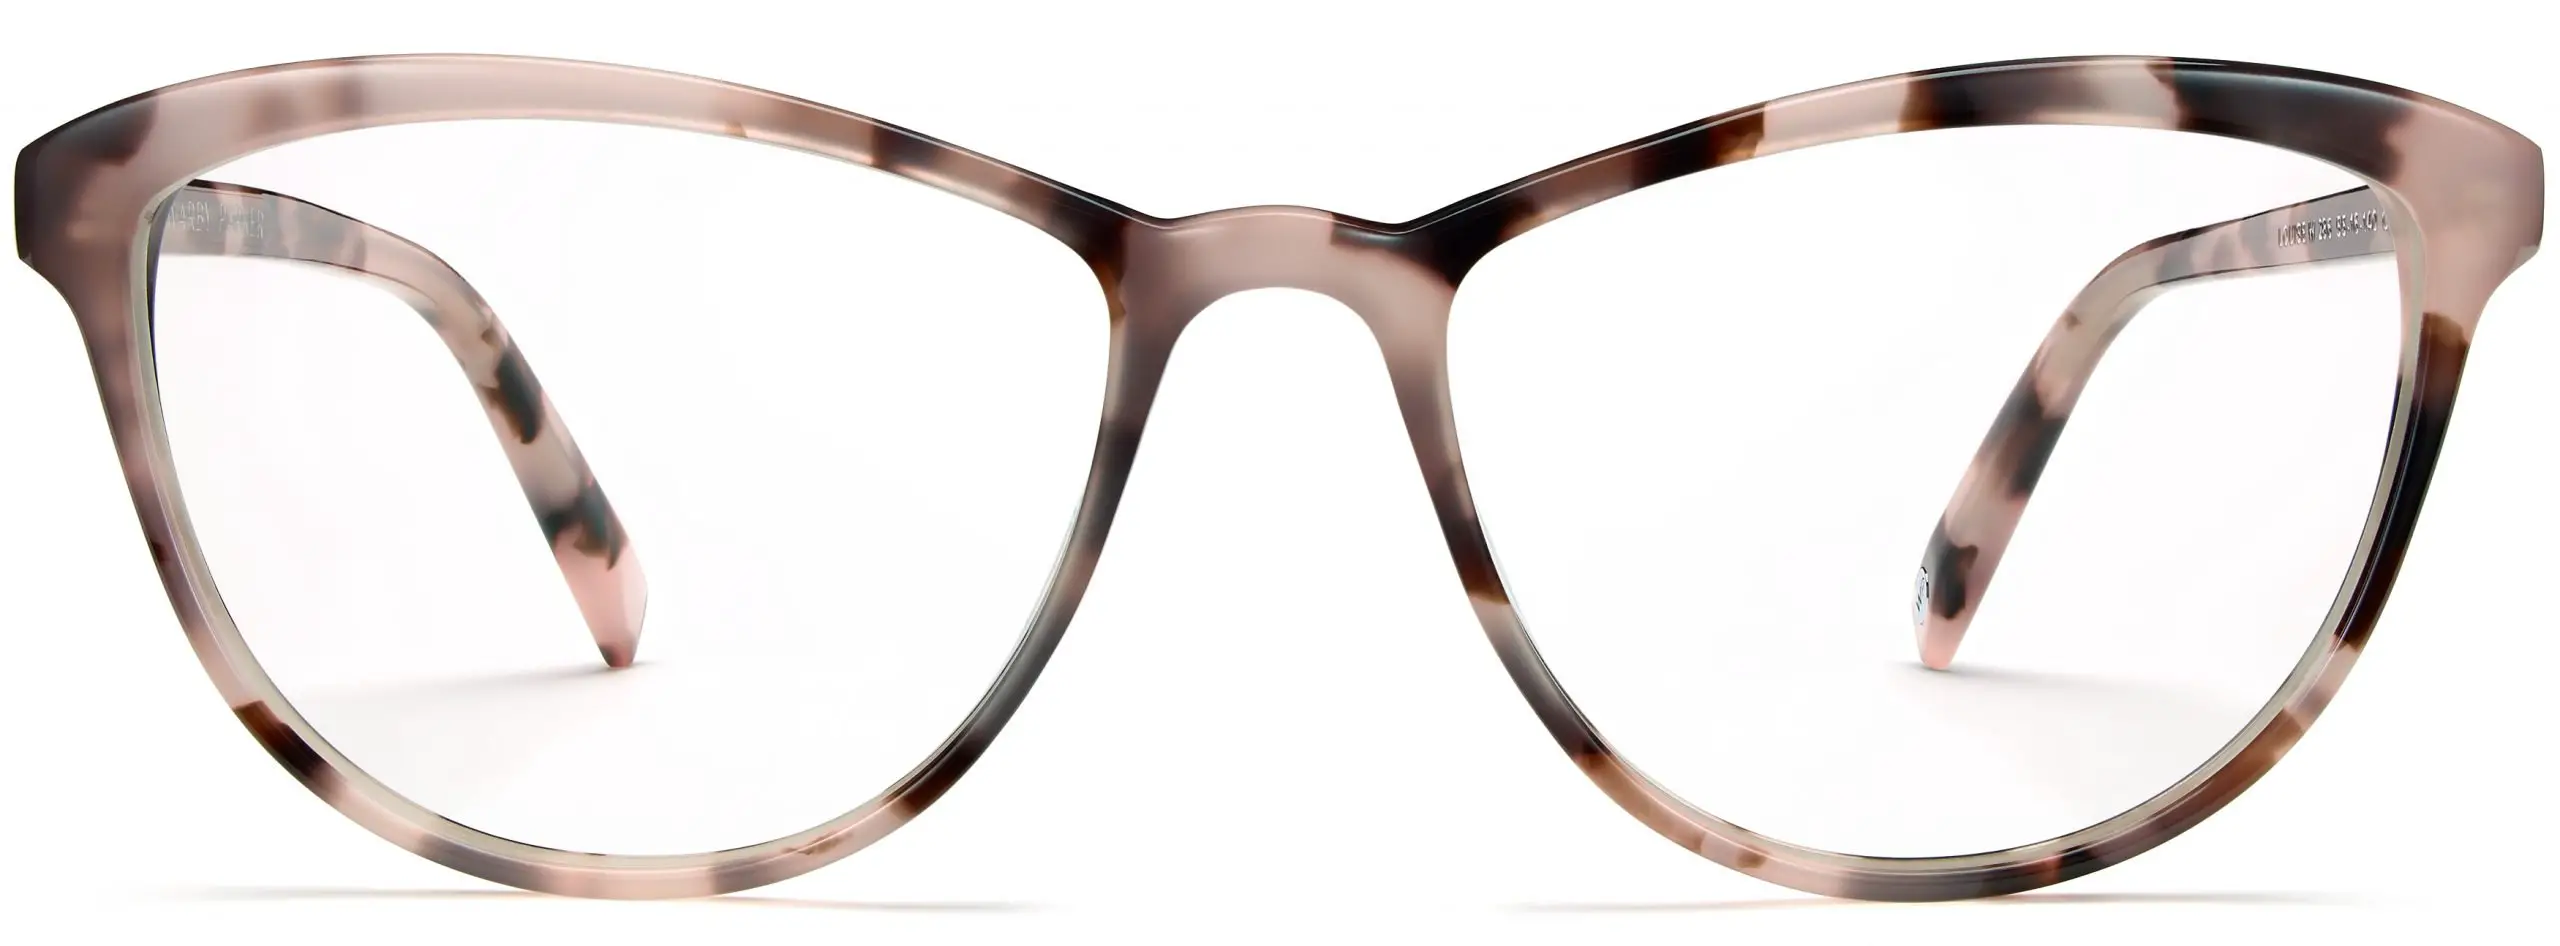 UnitedHealth offers discount Warby Parker glasses under ...